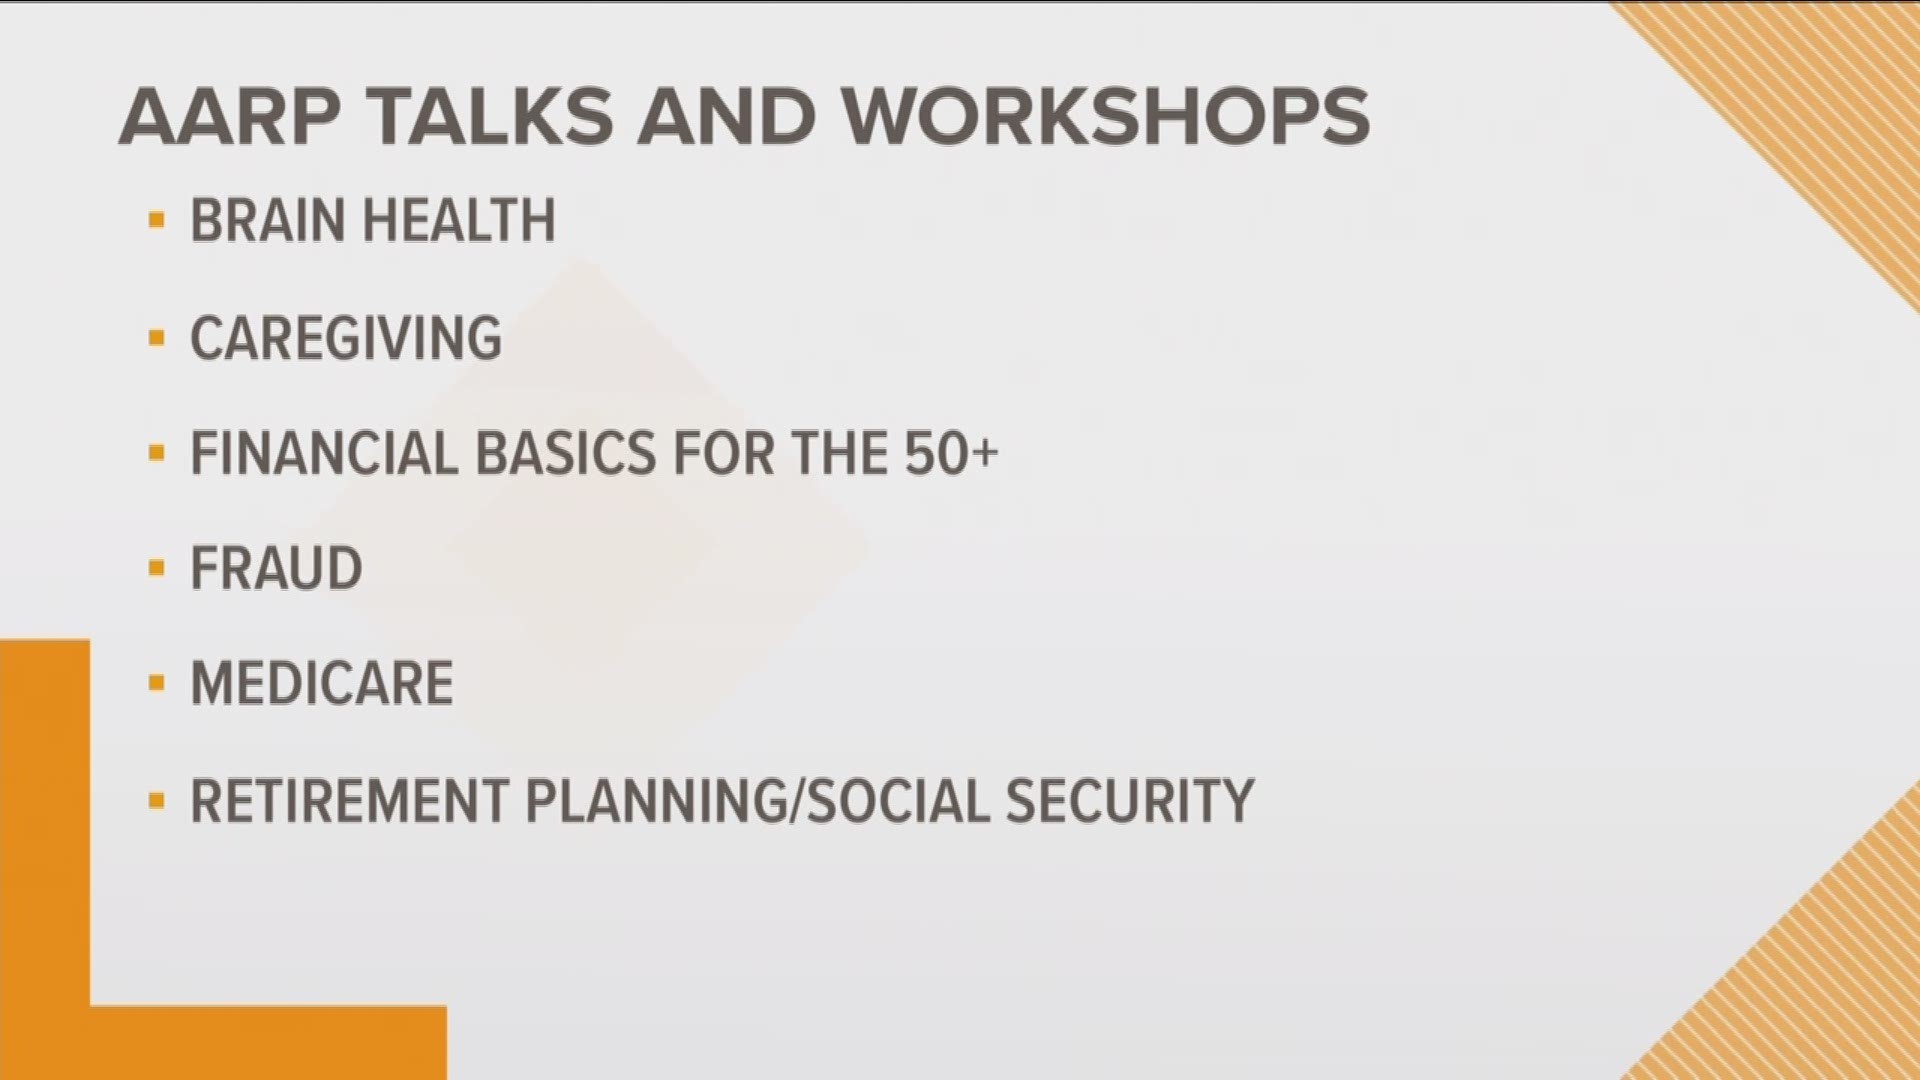 AARP and the Central Arkansas Library System have teamed up to provide informative Talks and Workshops on a variety of topics of interest to those over 50.